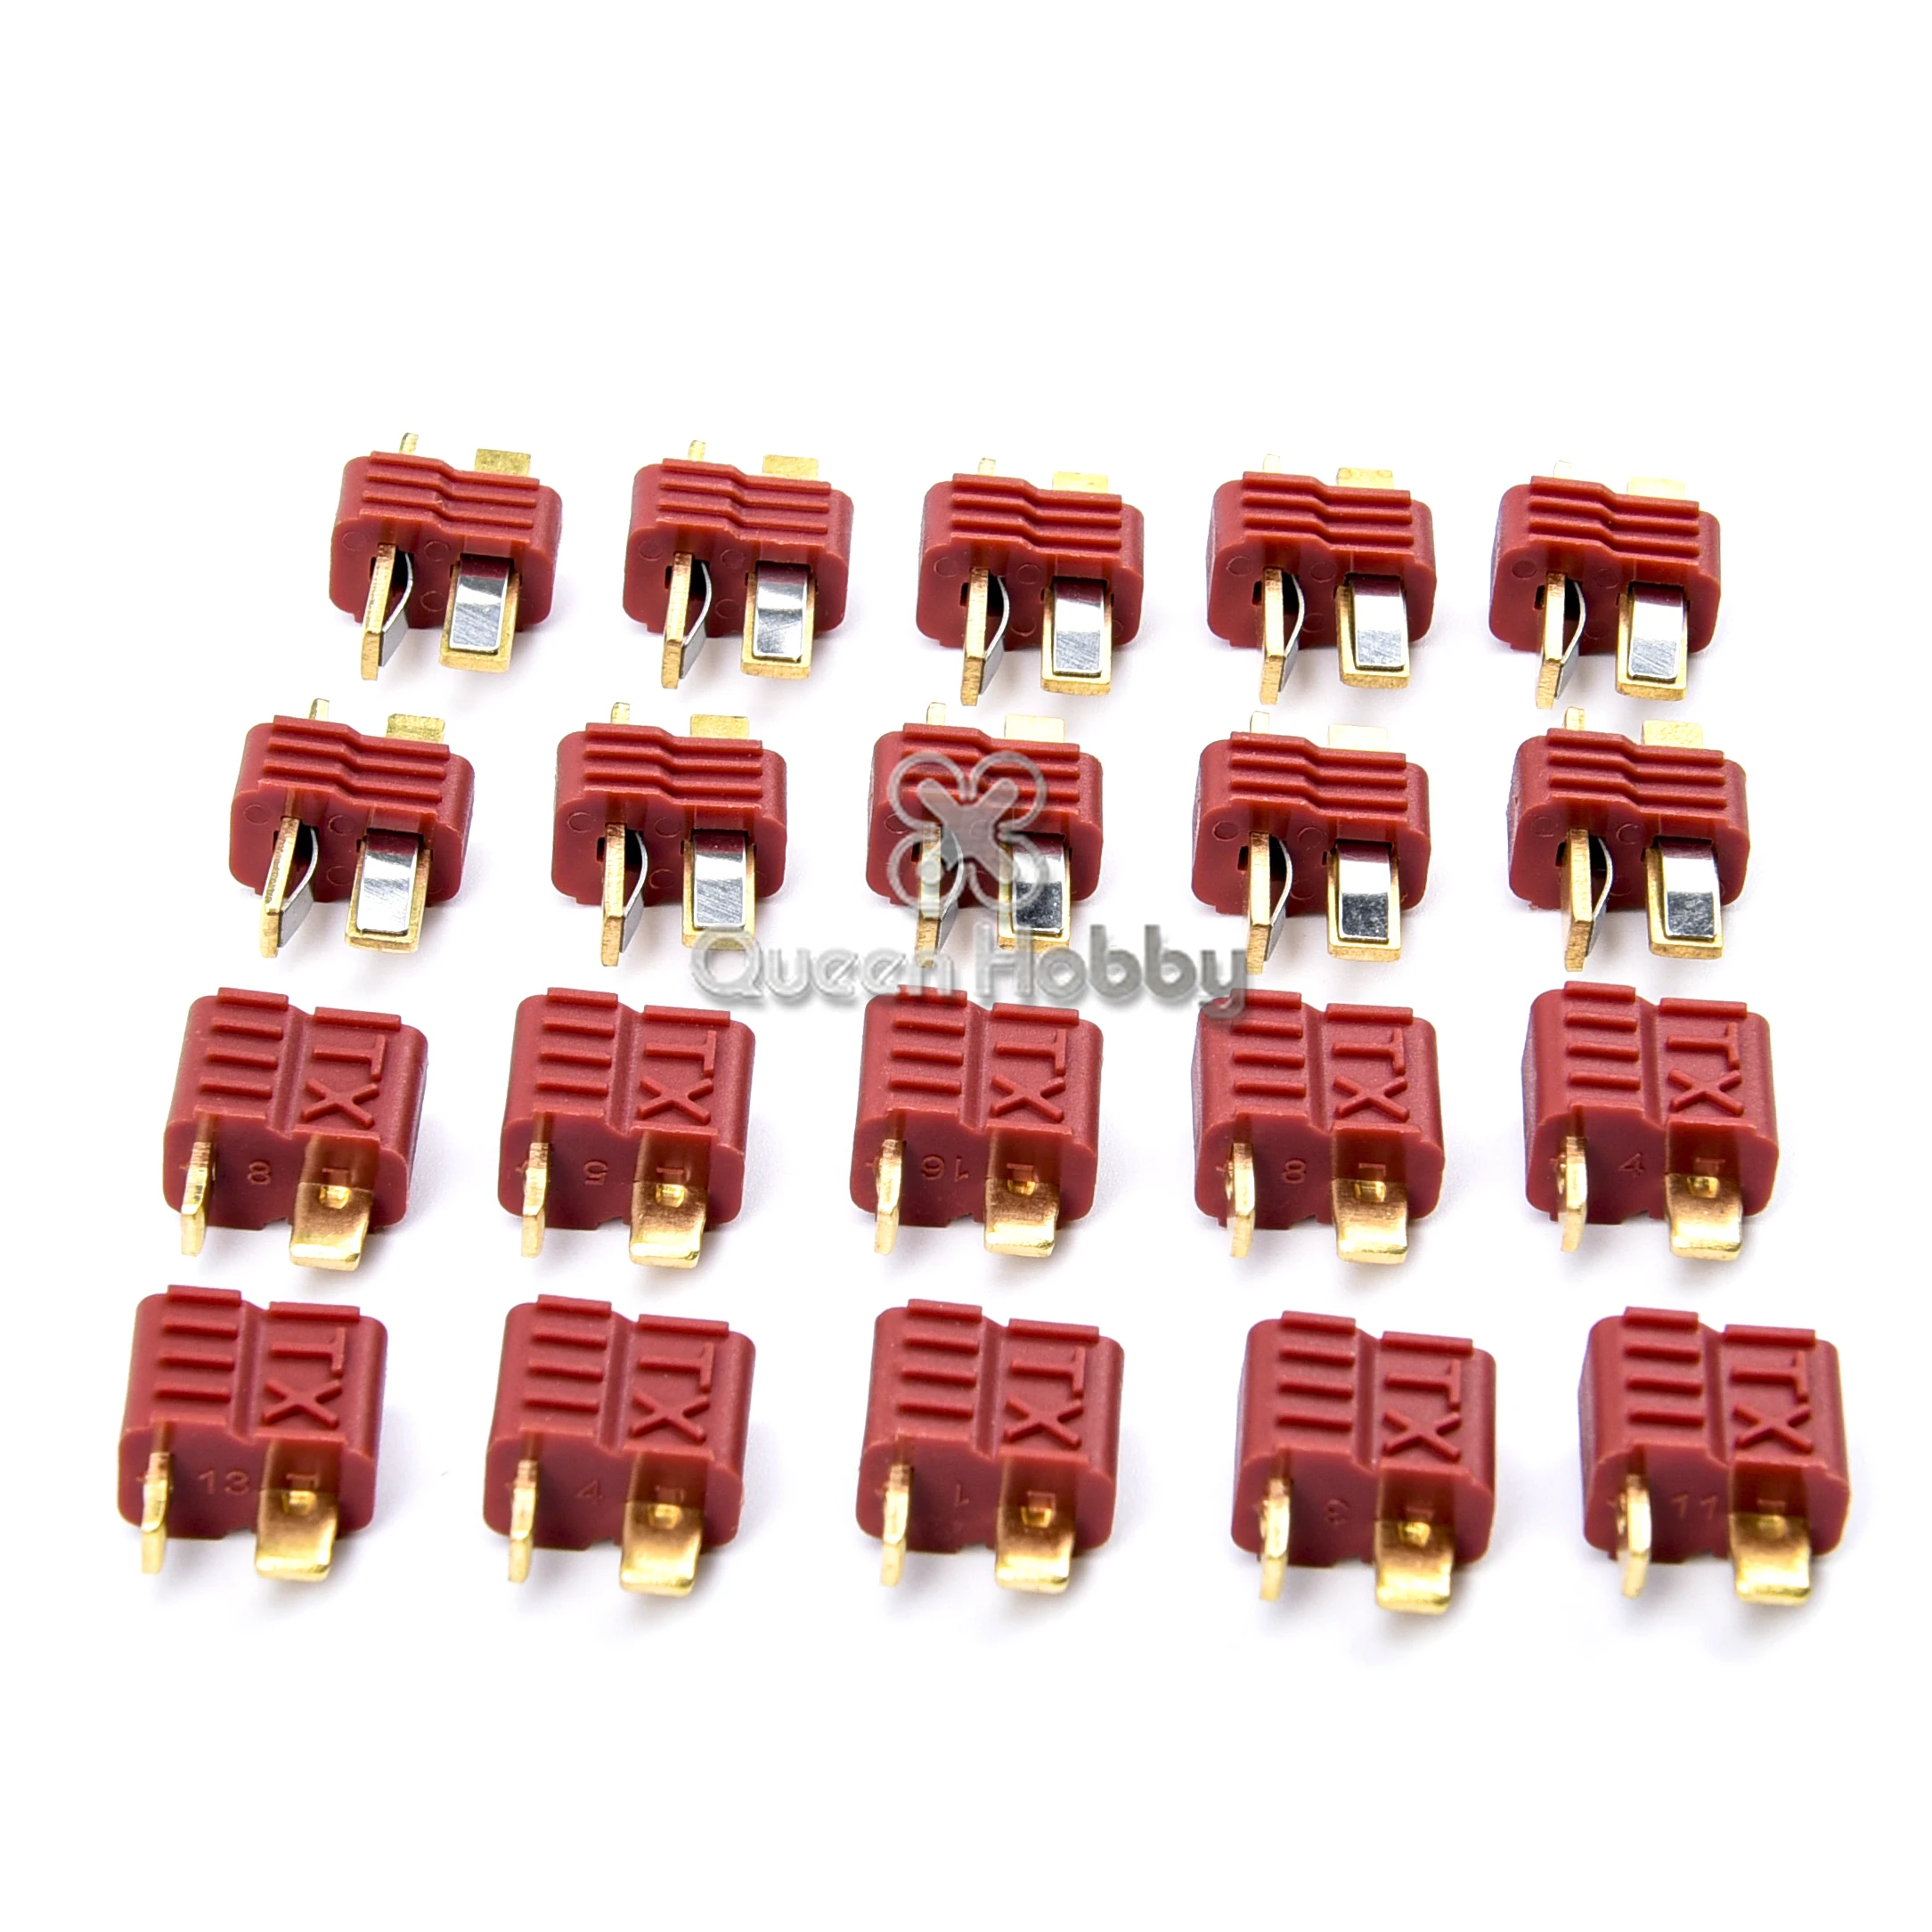 

20pcs/10pairs Anti-skidding Deans Plug T Style Connector Female / Male for RC Lipo Battery ESC Rc Helicopter